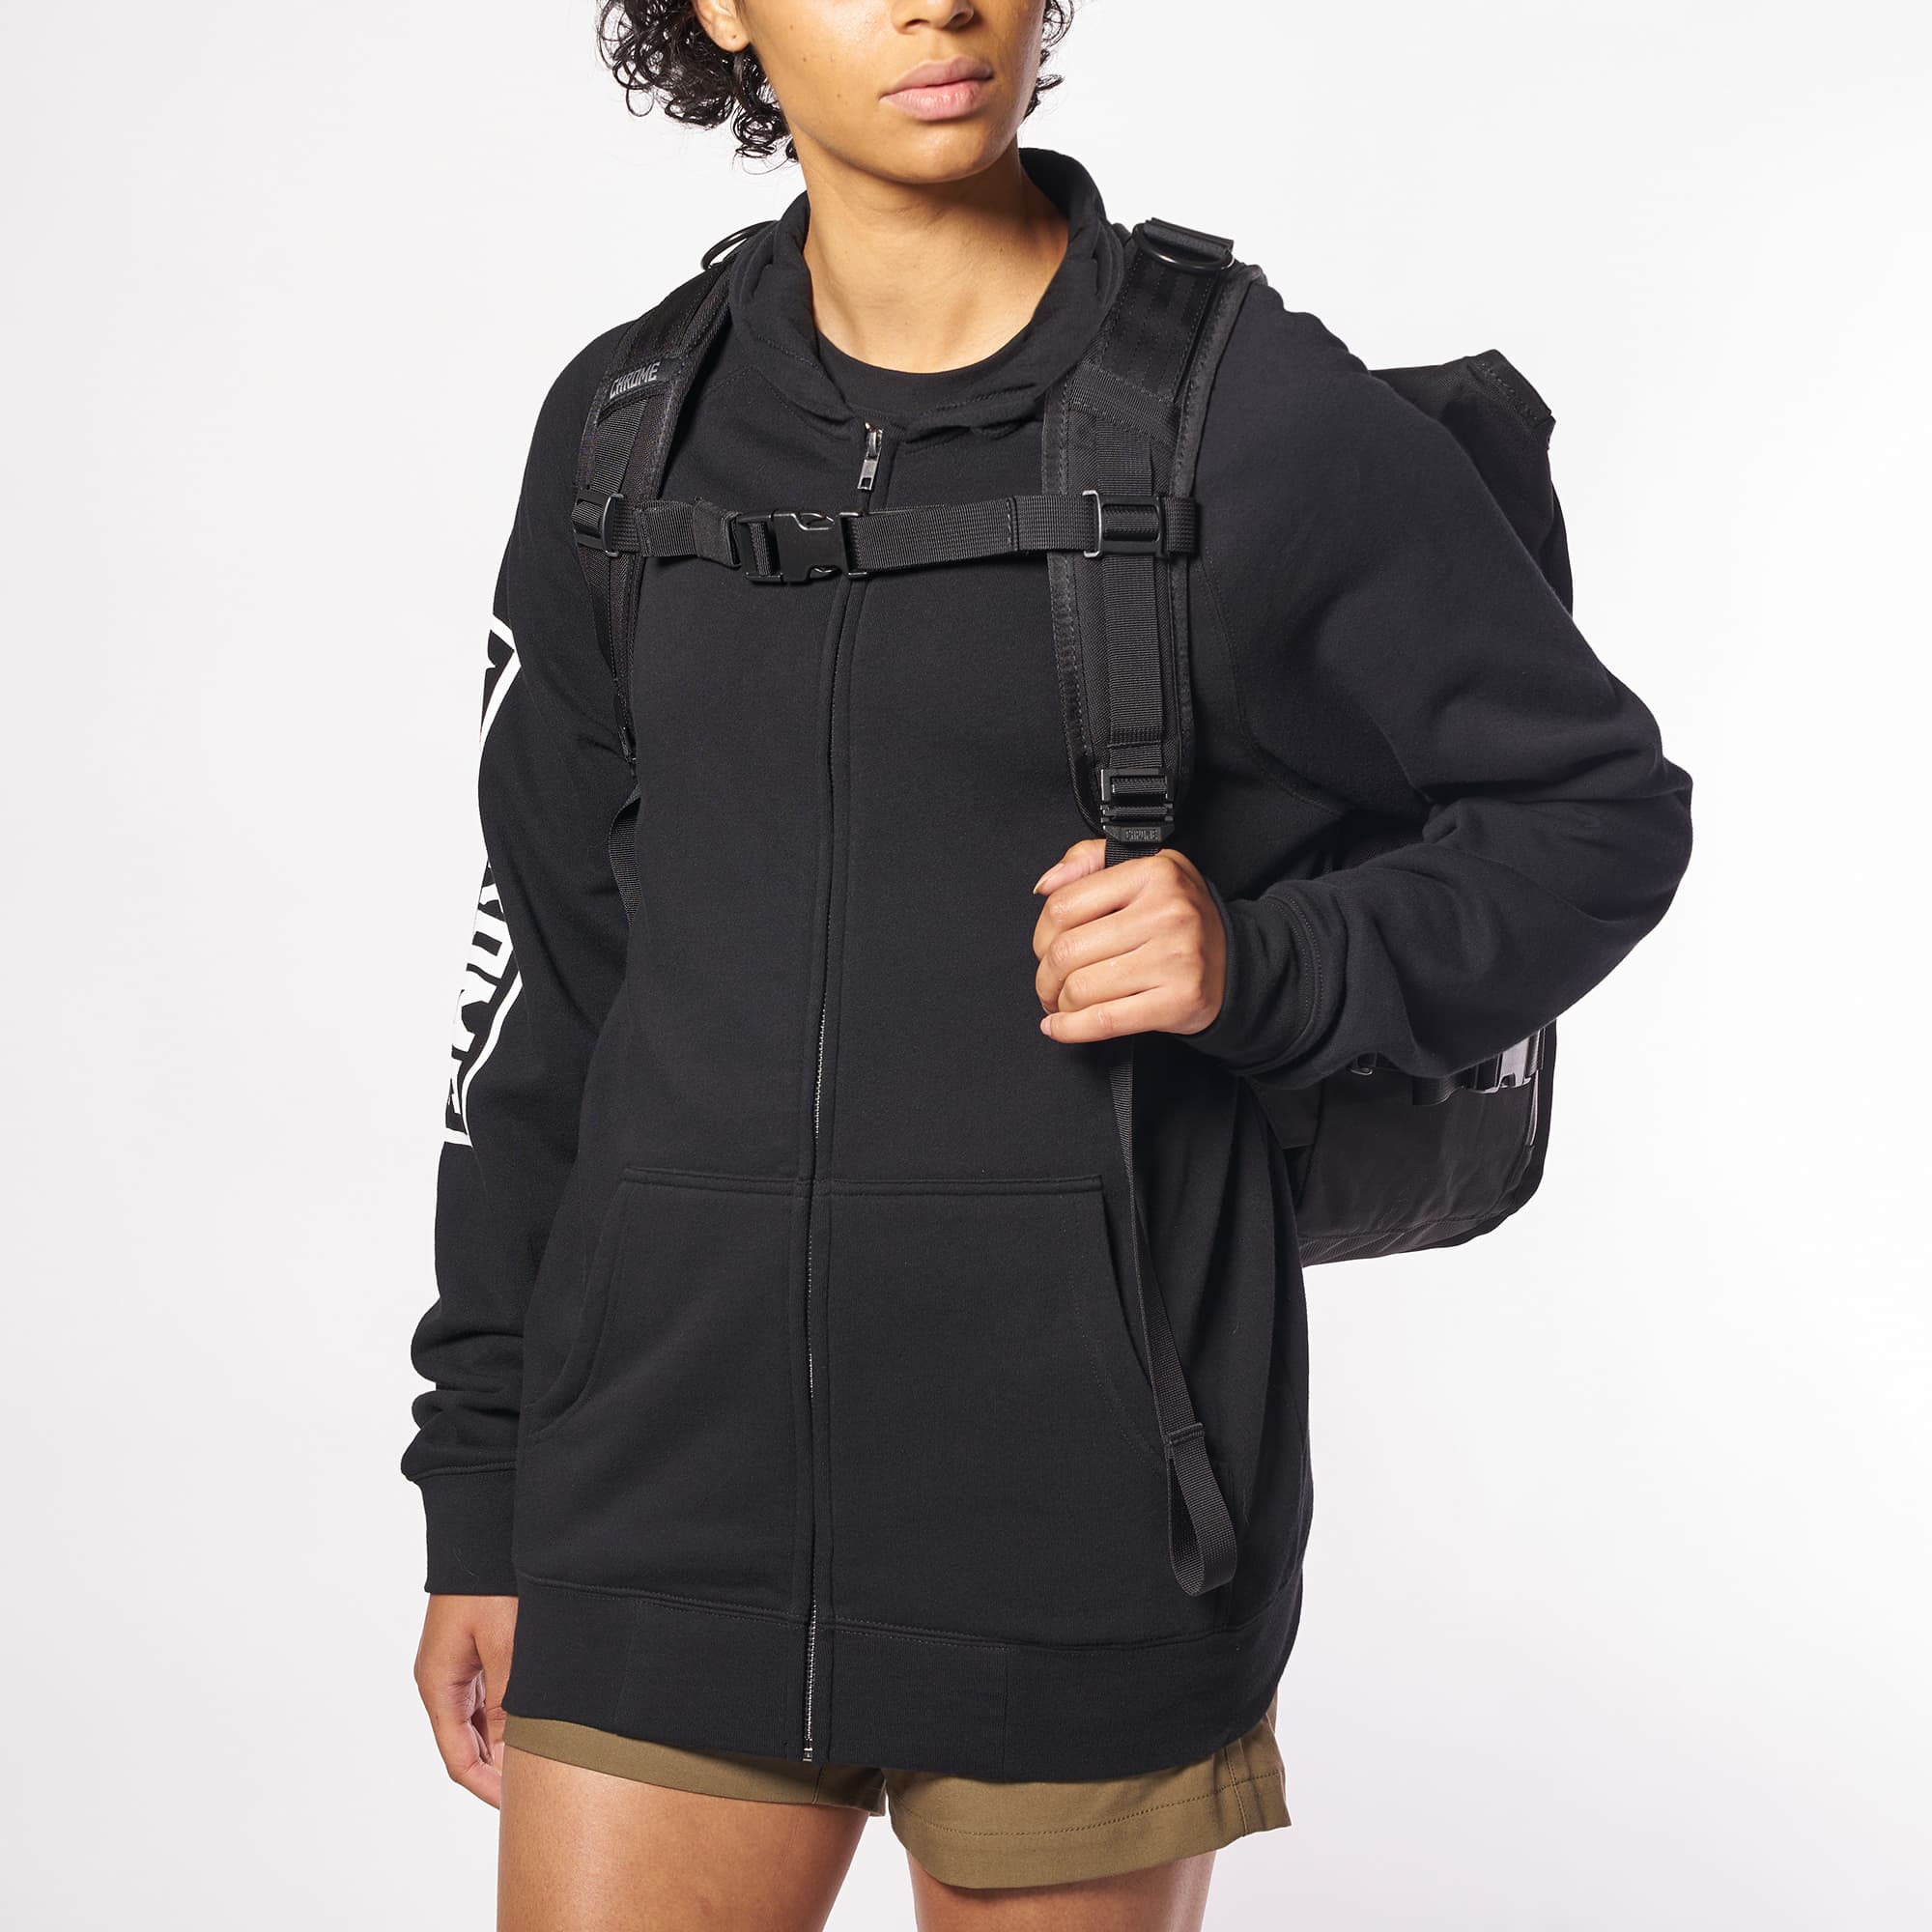 Warsaw medium size flap backpack in black front view worn by a woman